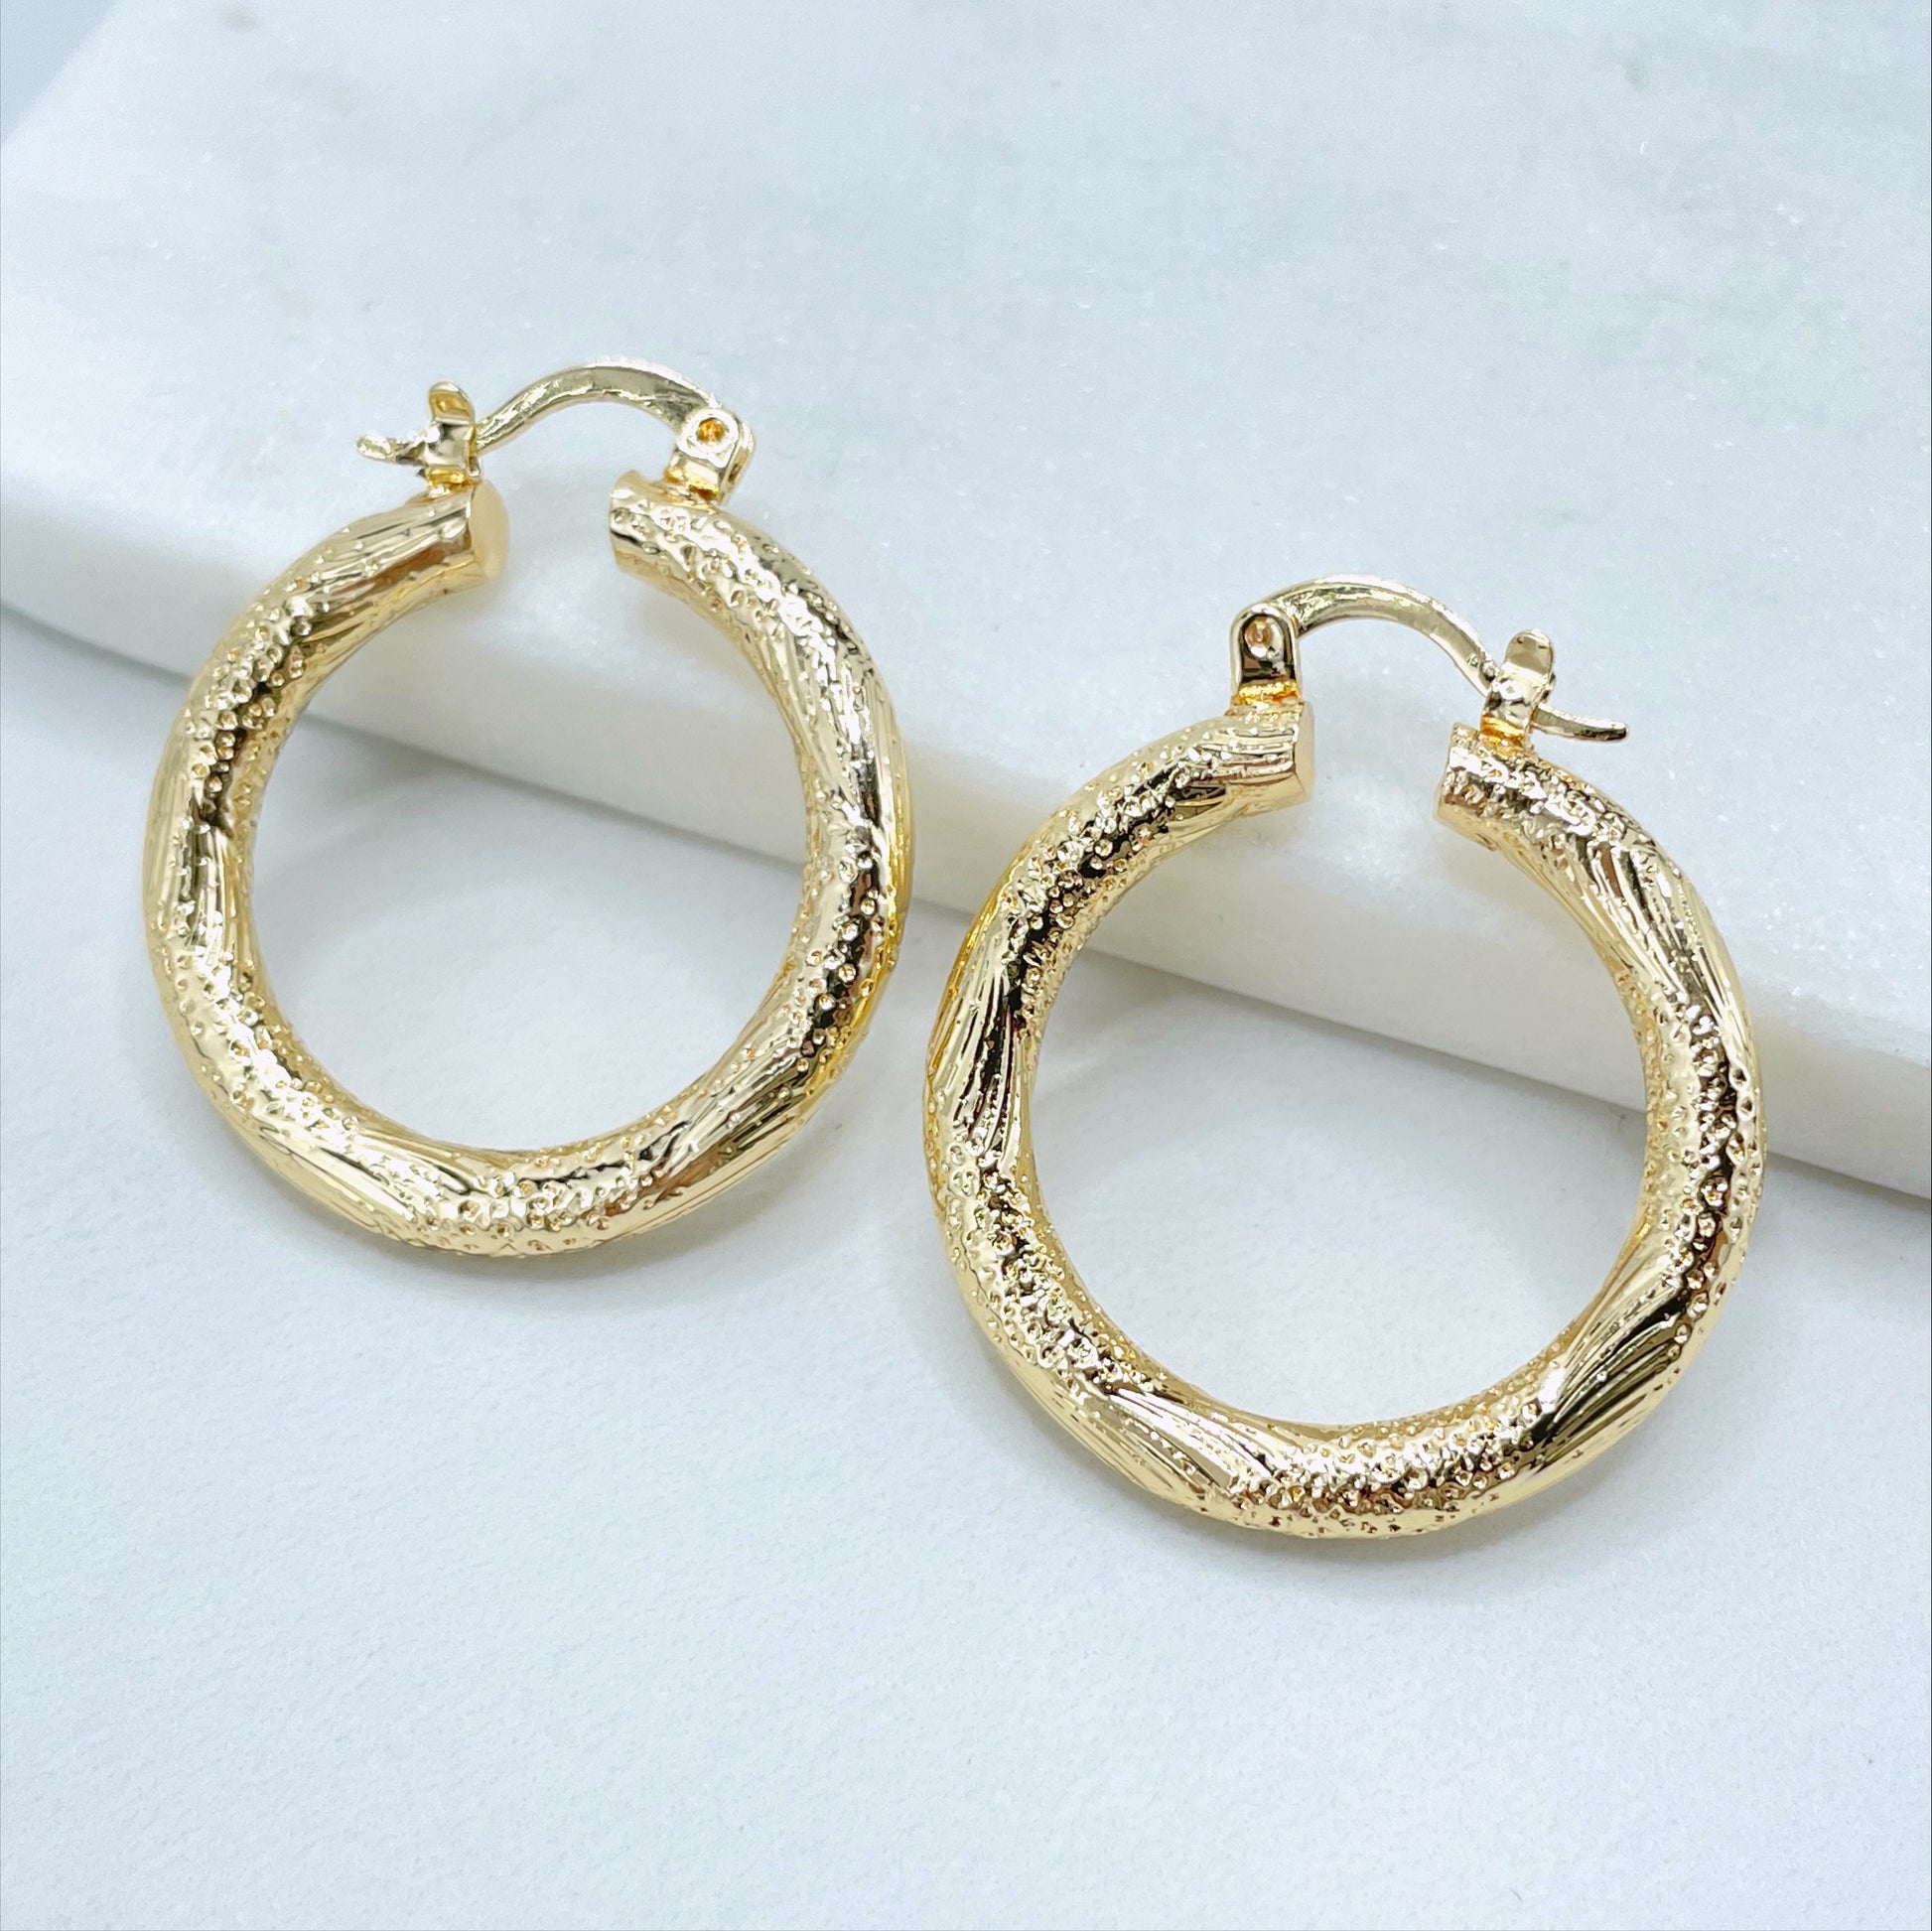 18k Gold Filled 30mm Texturized Hoop Earrings with 4mm Thickness, Wholesale Jewelry Making Supplies